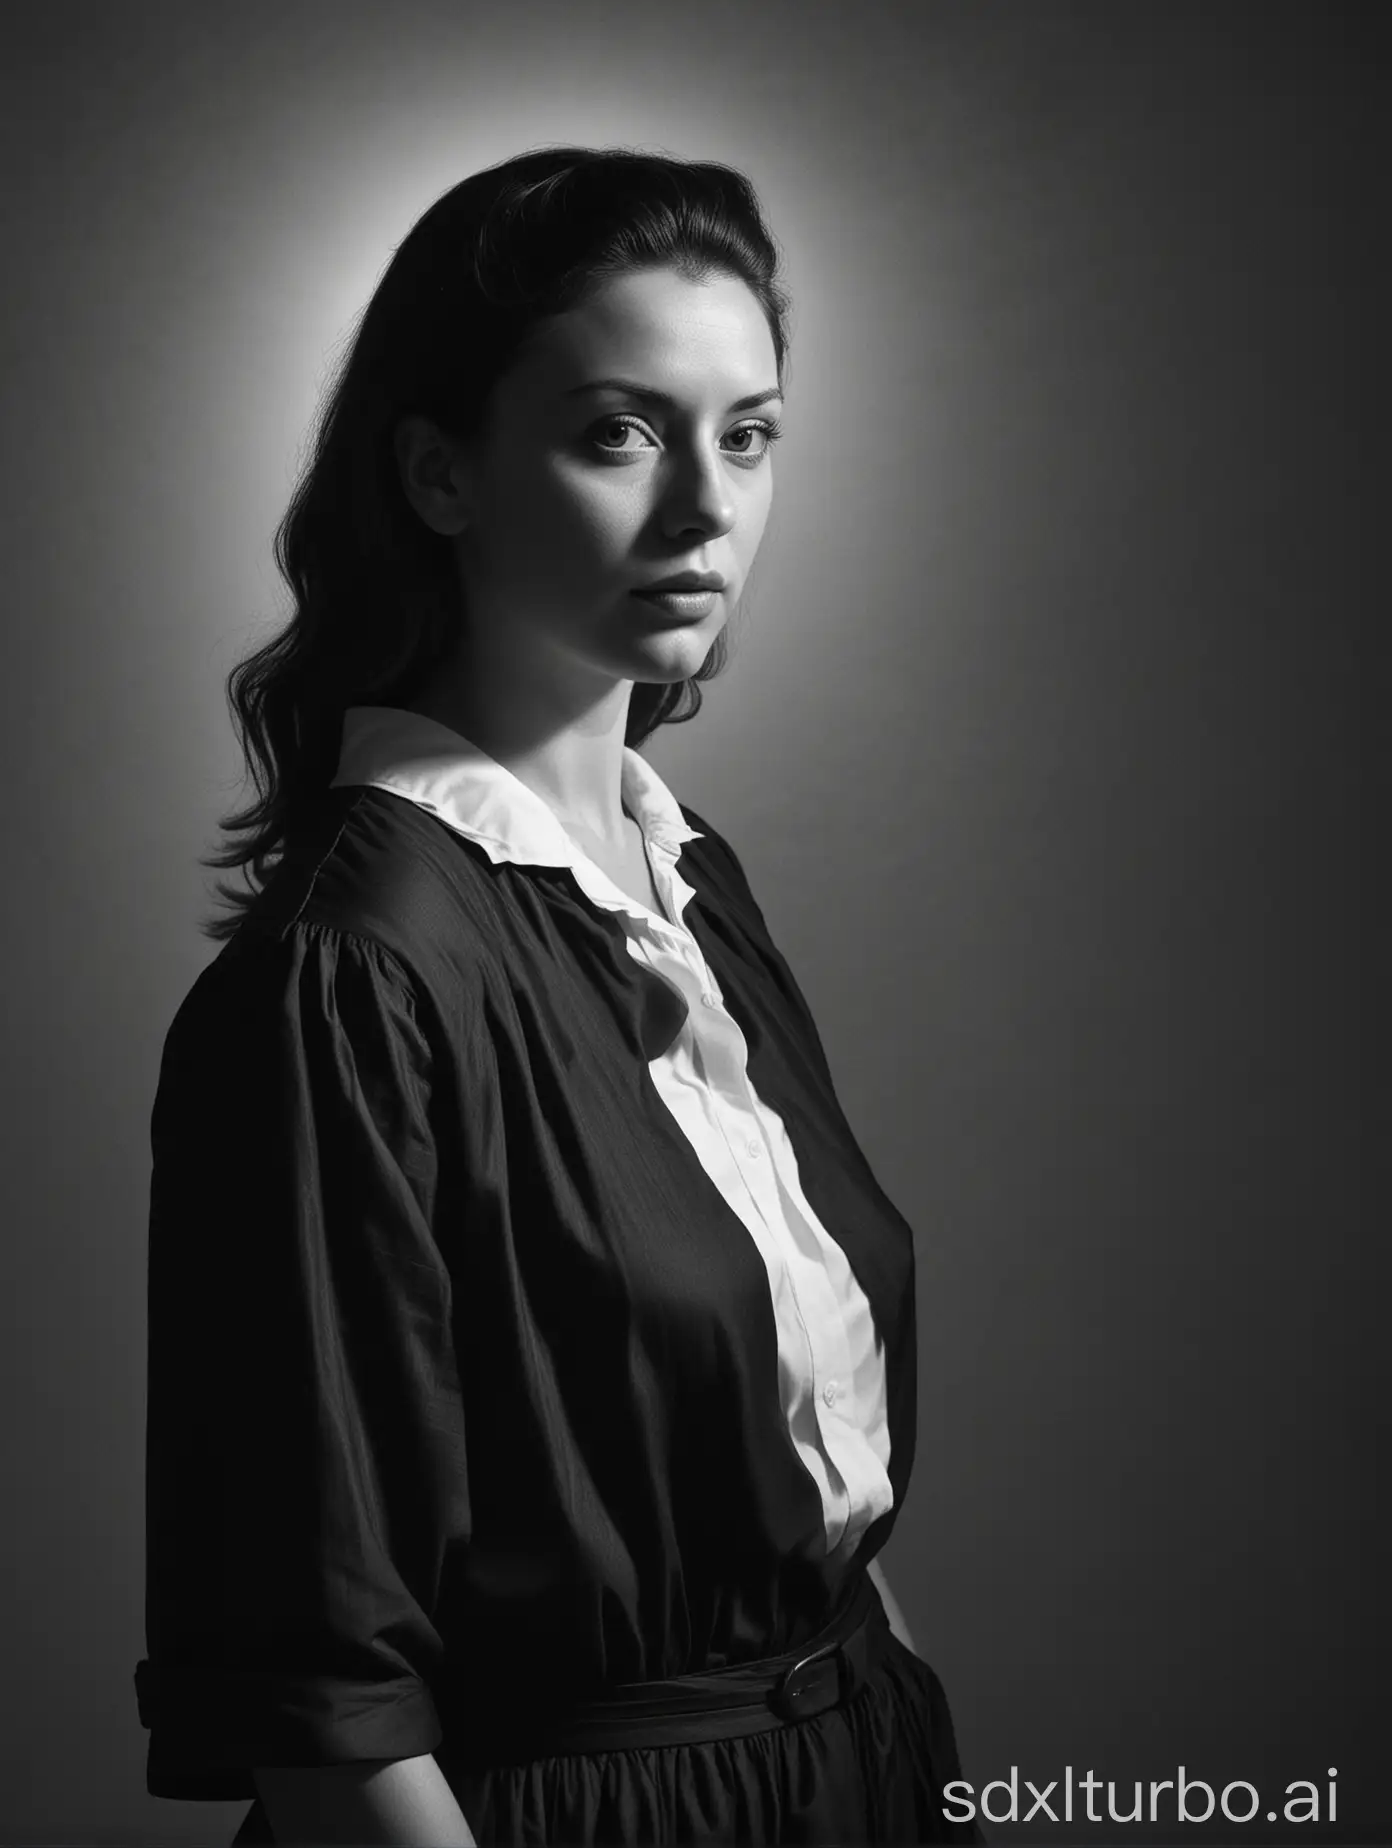 a Woman posing for a black and white photo, in the style of contrasting lights and darks, spanish school, social media portraiture, jonathan wolstenholme, cinestill 50d, jusepe de ribera, mary beale